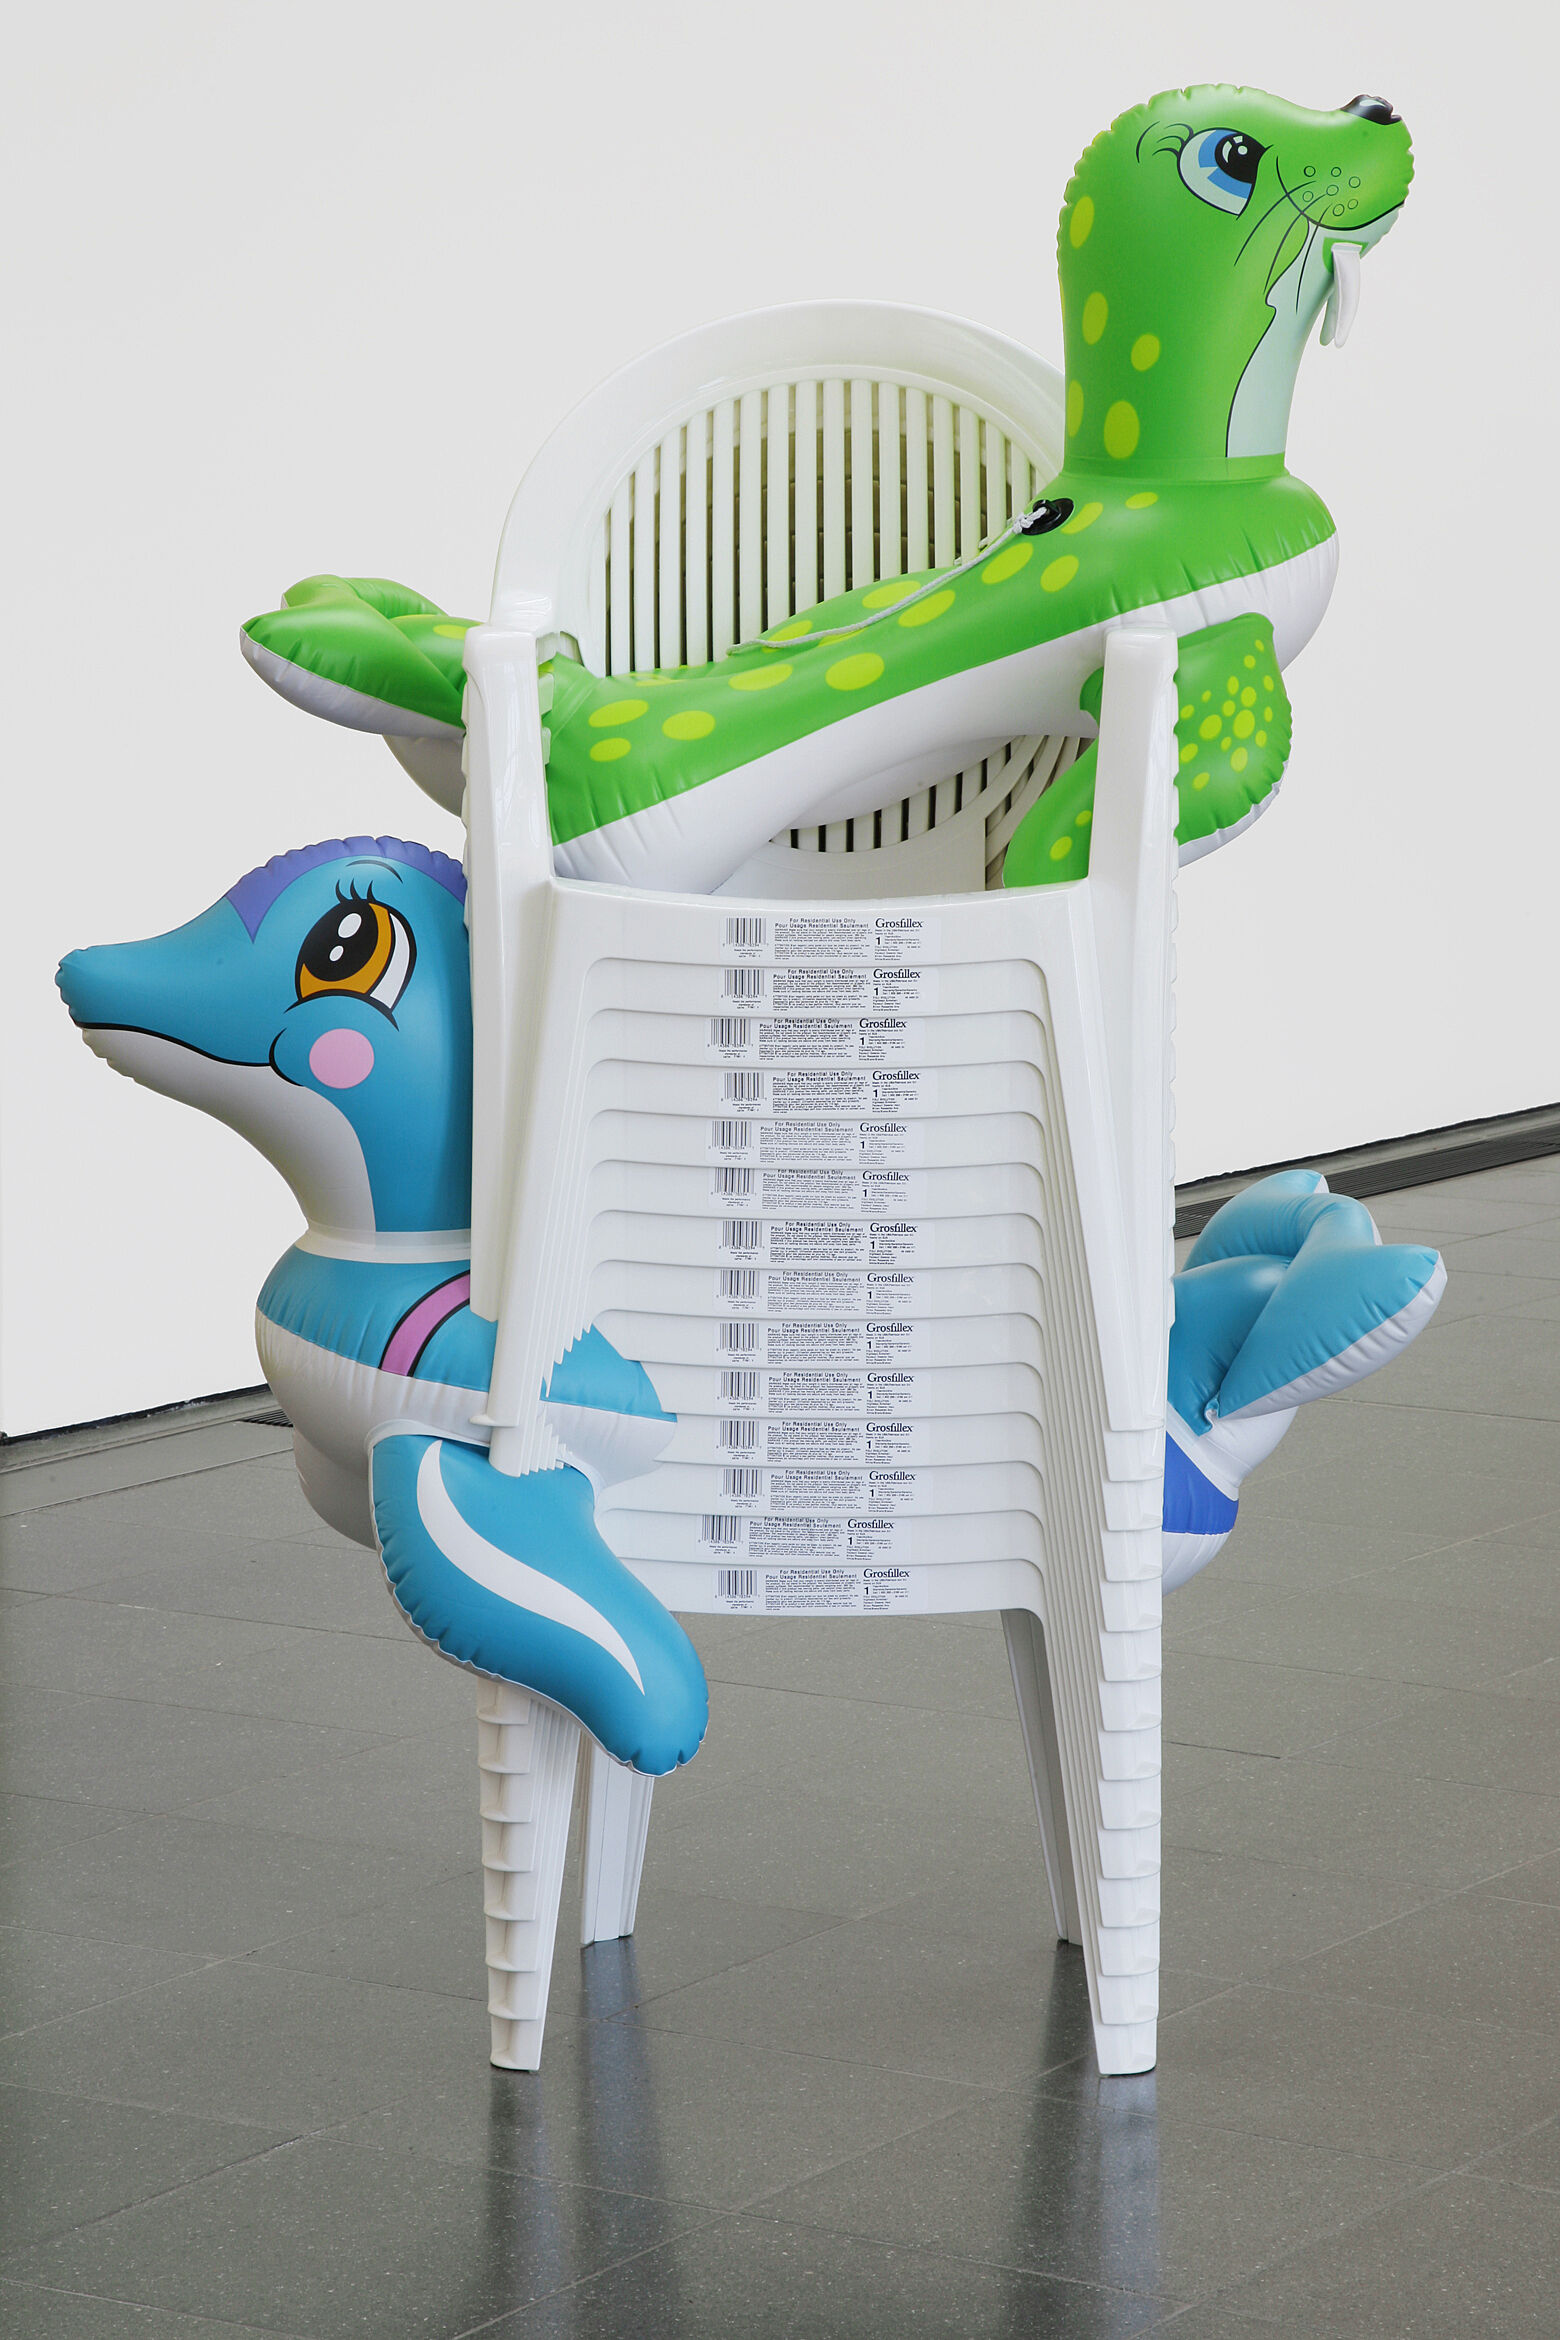 A sculpture of two inflatable seals stuck in a stack of chairs.